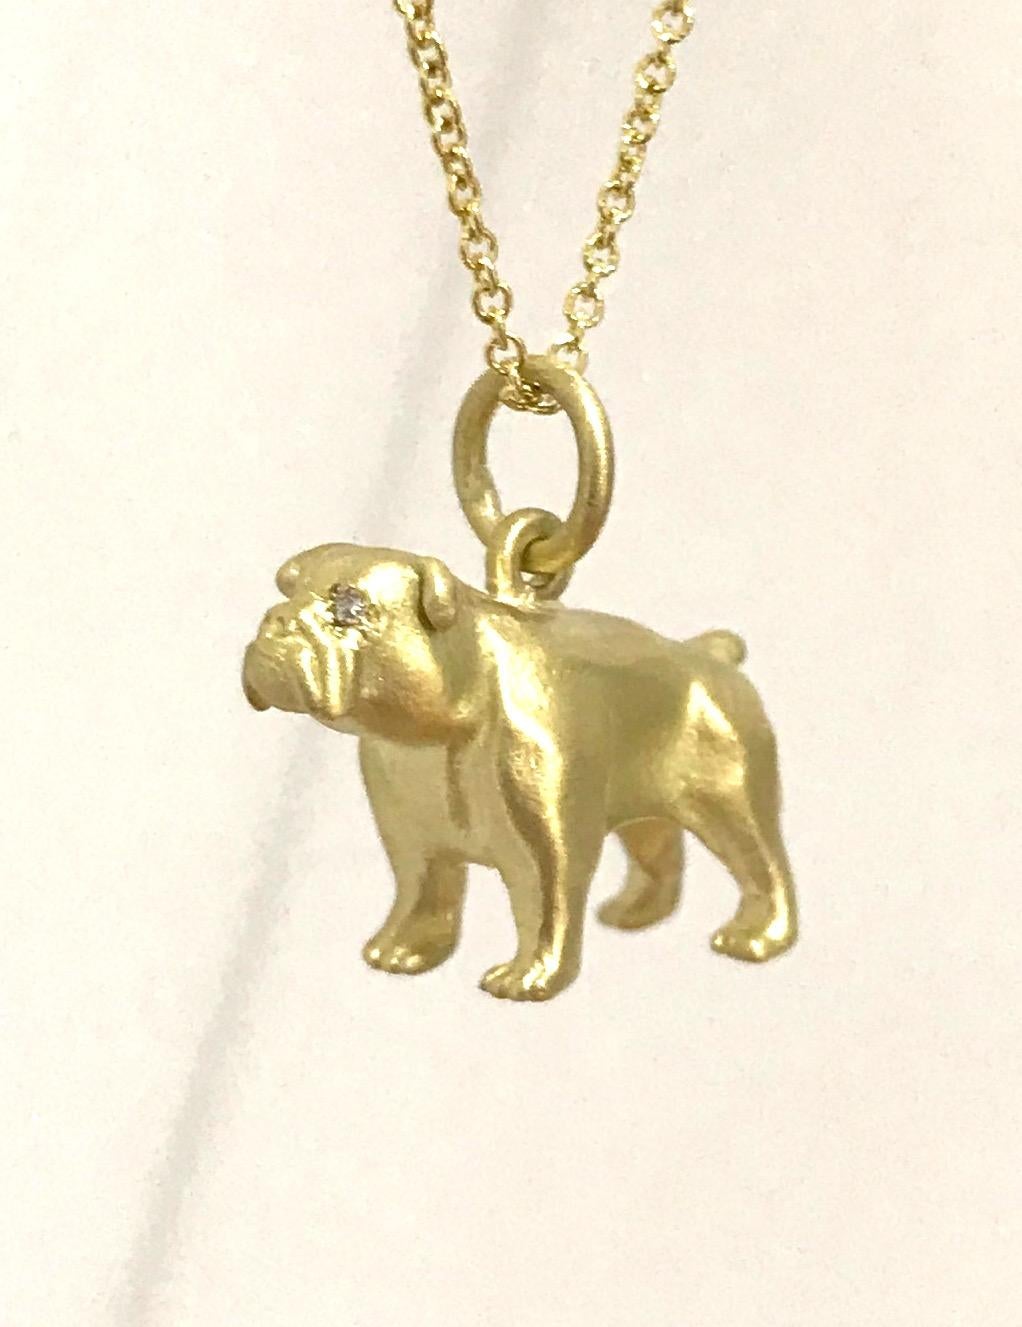 Bulldogs symbolize guidance, protection, loyalty, fidelity, faithfulness, watchfulness, and love. For savvy bulldog lover, show your true feelings and never leave your dog at home by wearing this sparkling charm either on a chain or leather cord